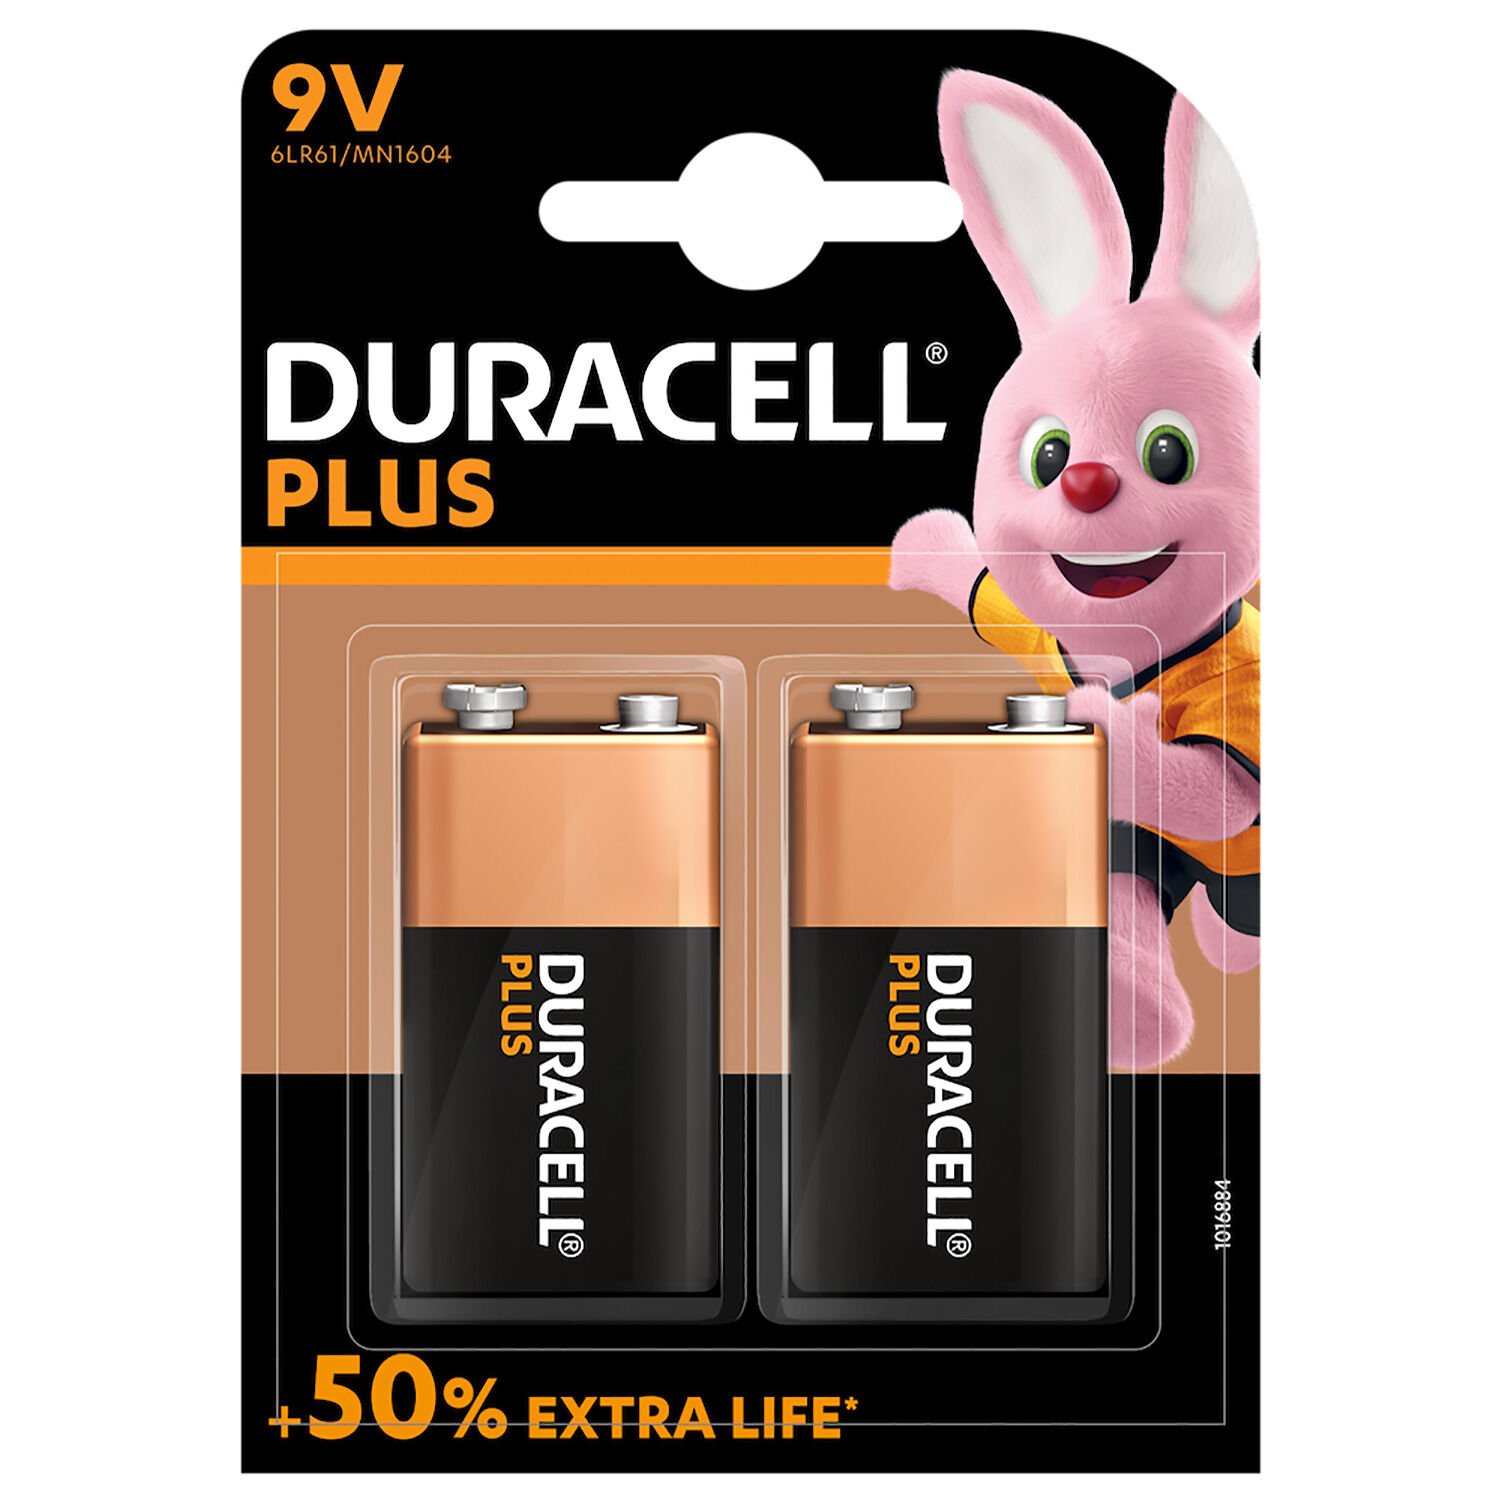 Duracell Plus 9V Batteries 2 Pack - Home Store + More